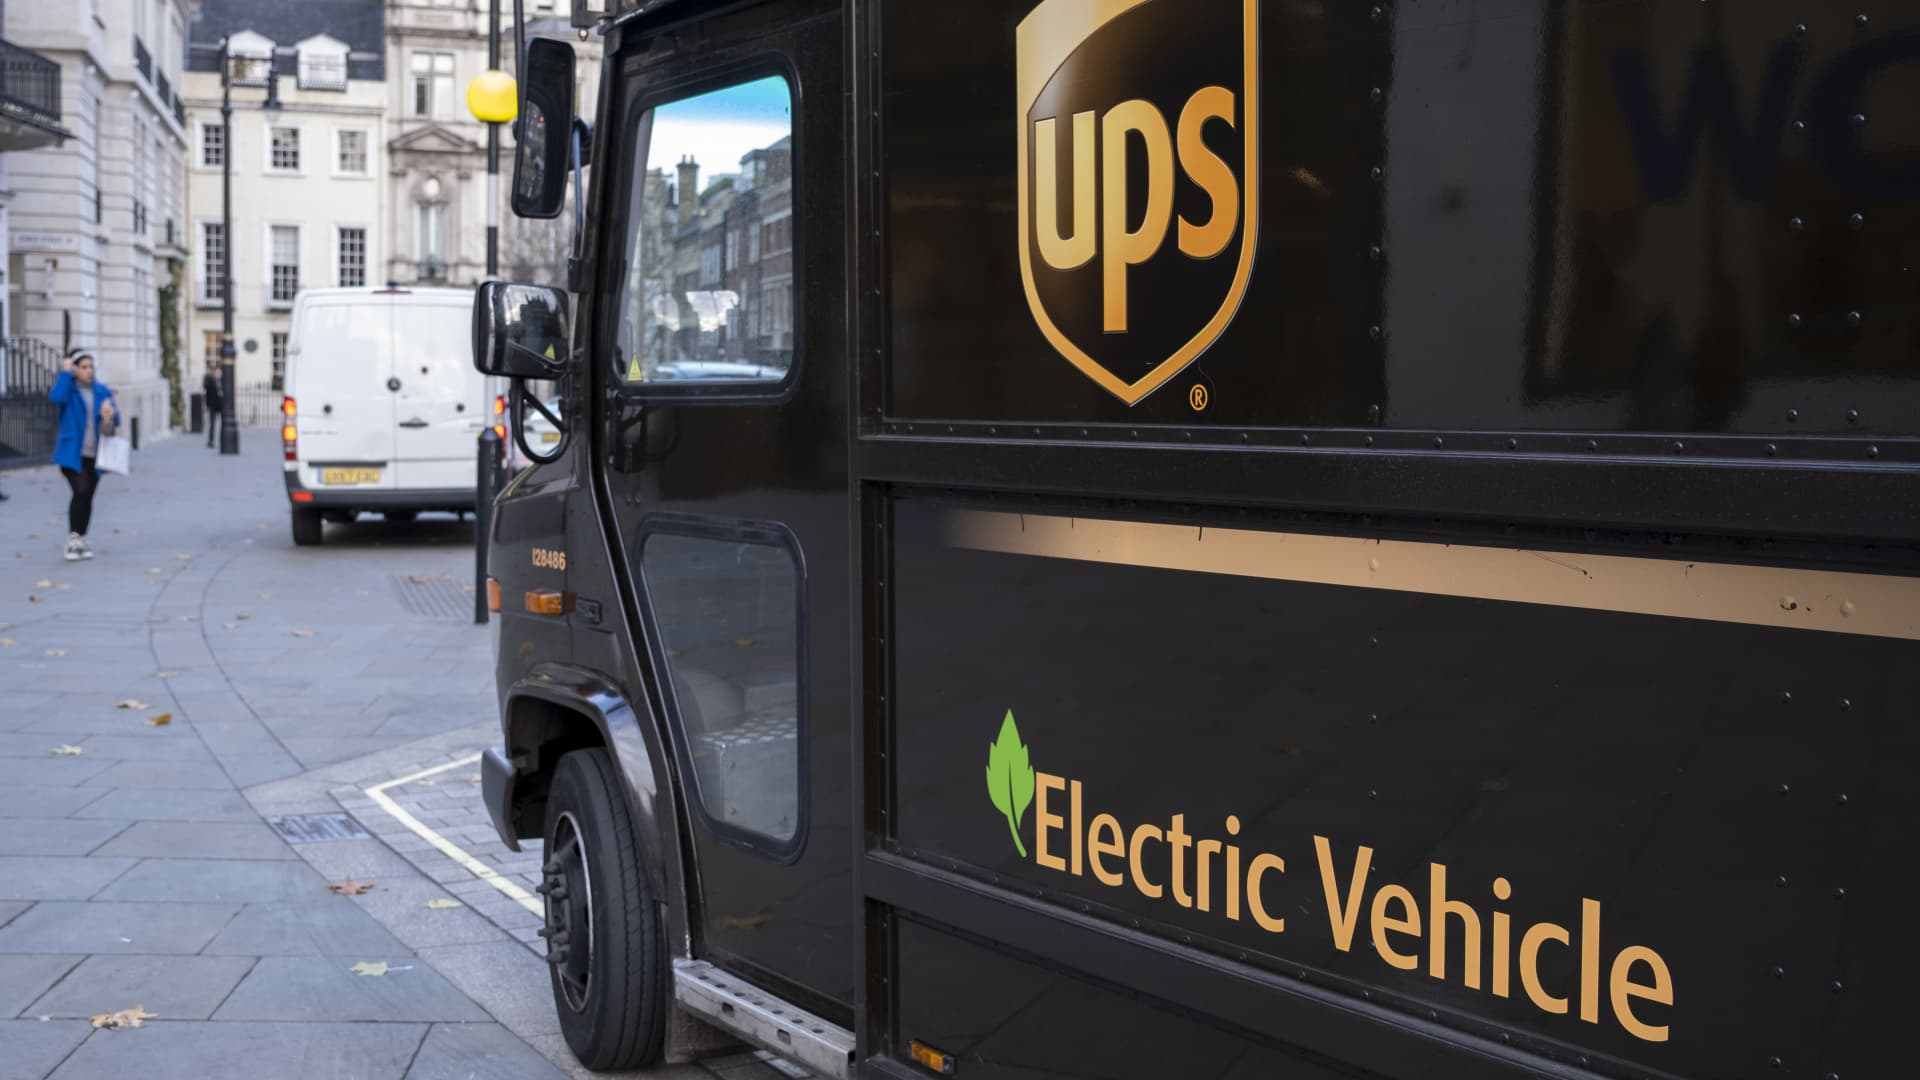 UPS revenue falls short of expectations despite growth in U.S. business